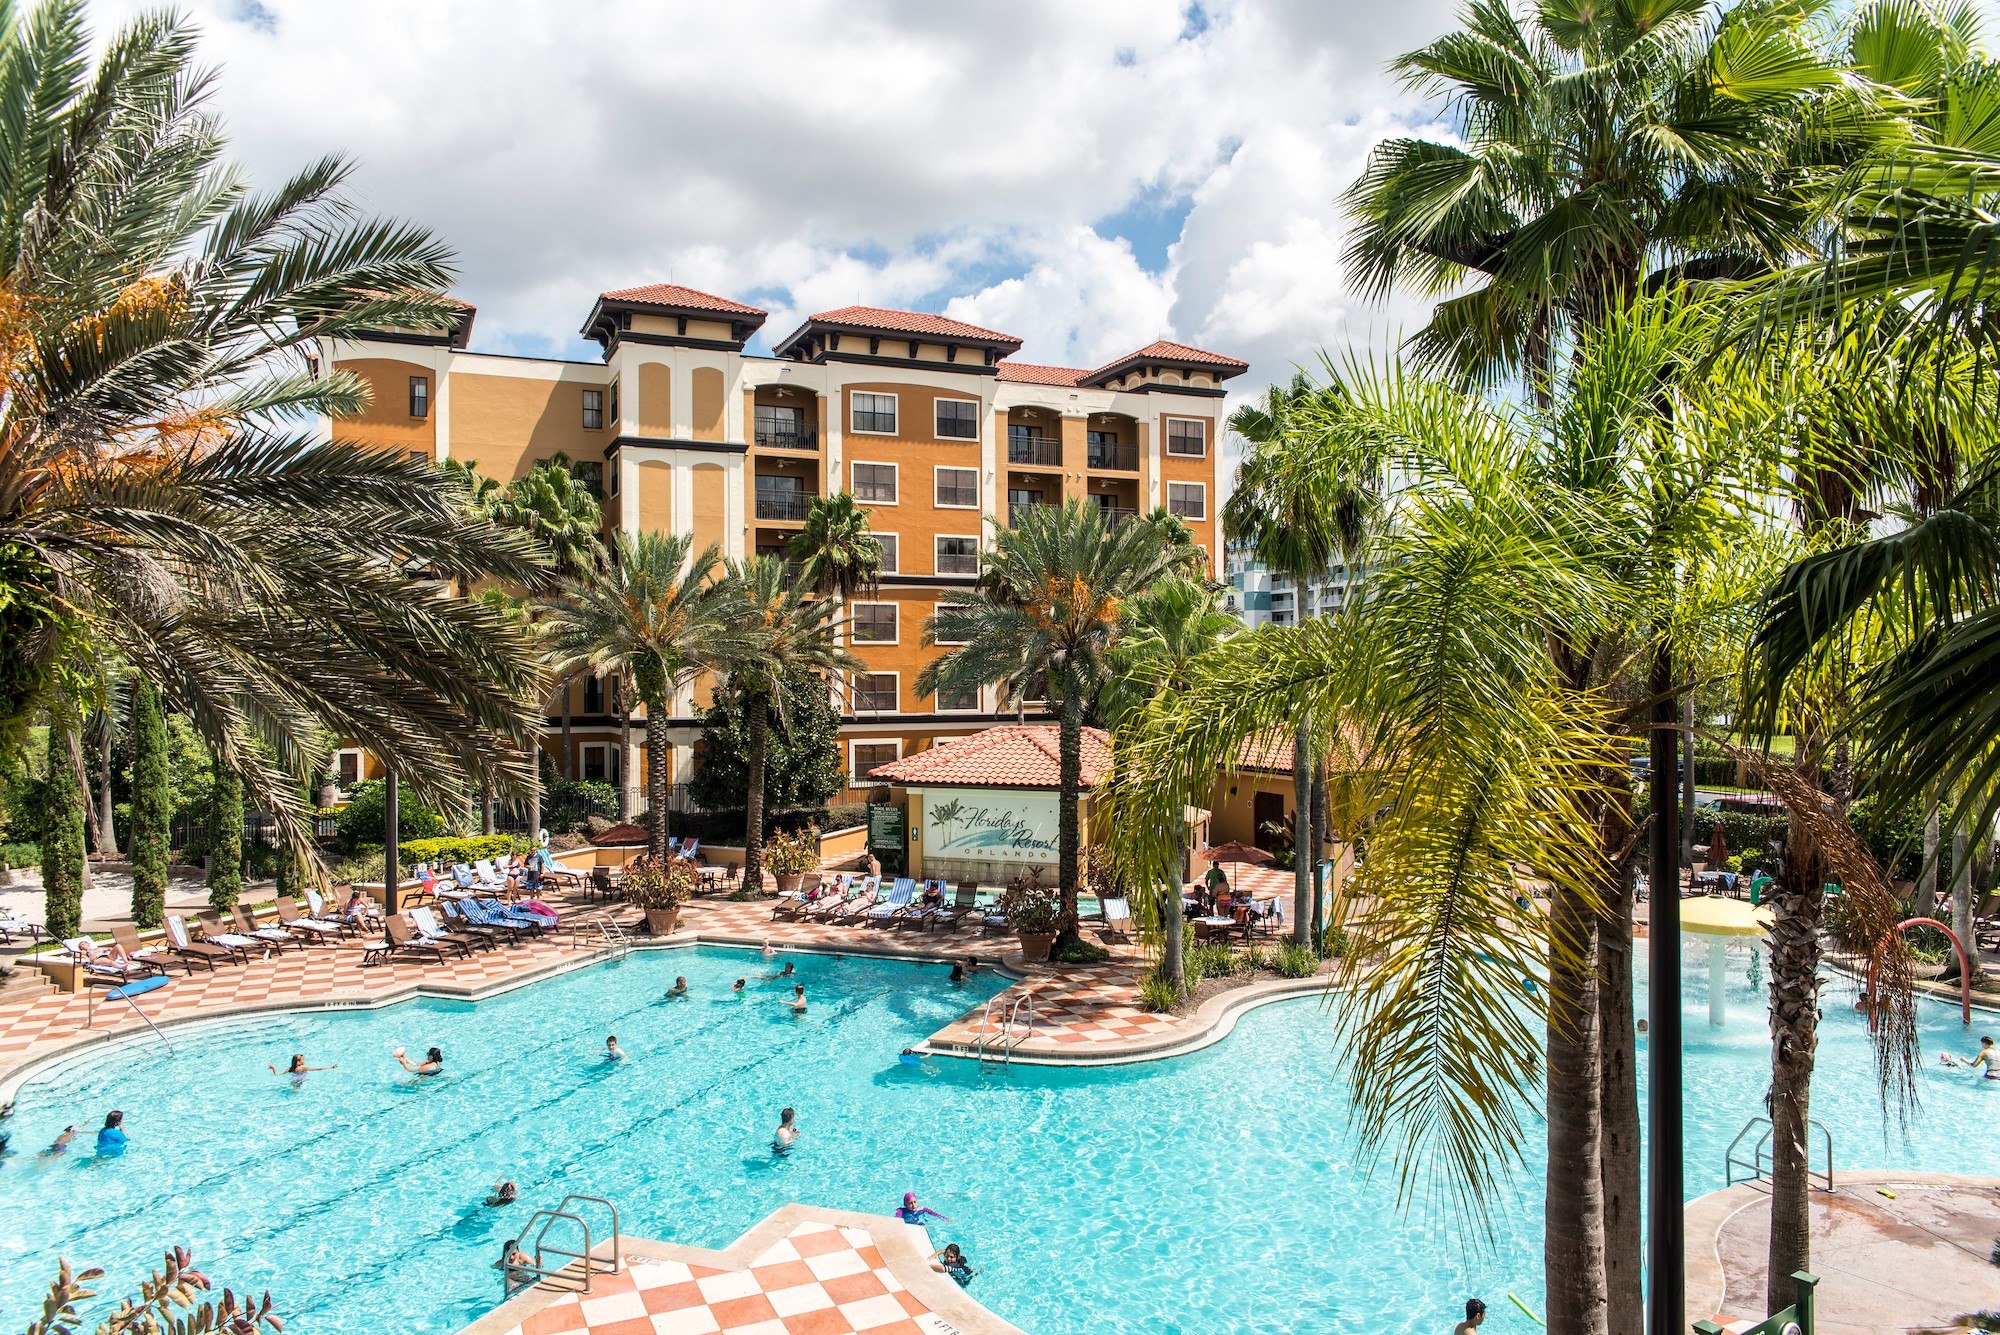 Great Deals On Your Stay At Floridays Resort Orlando Near Disney World